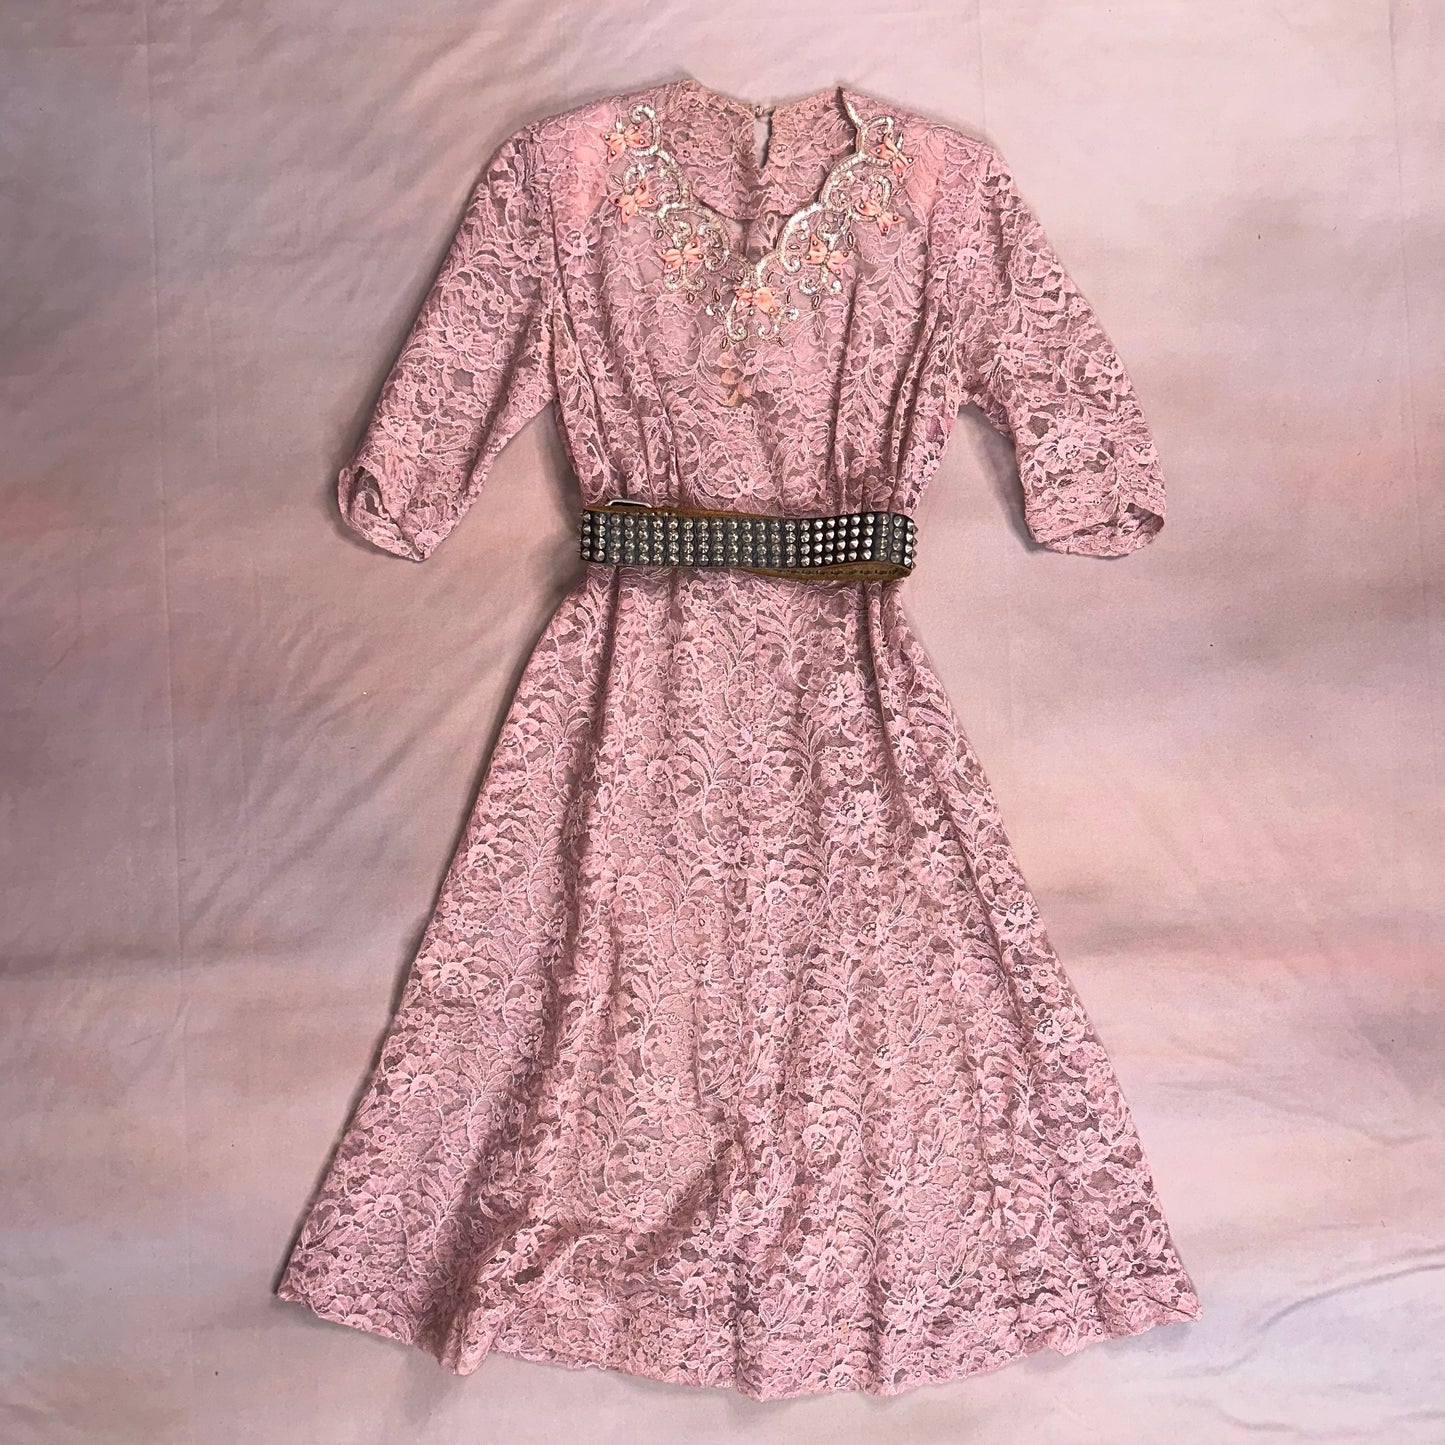 VINTAGE 50s DUSTY PINK SHEER LACE MIDI DRESS